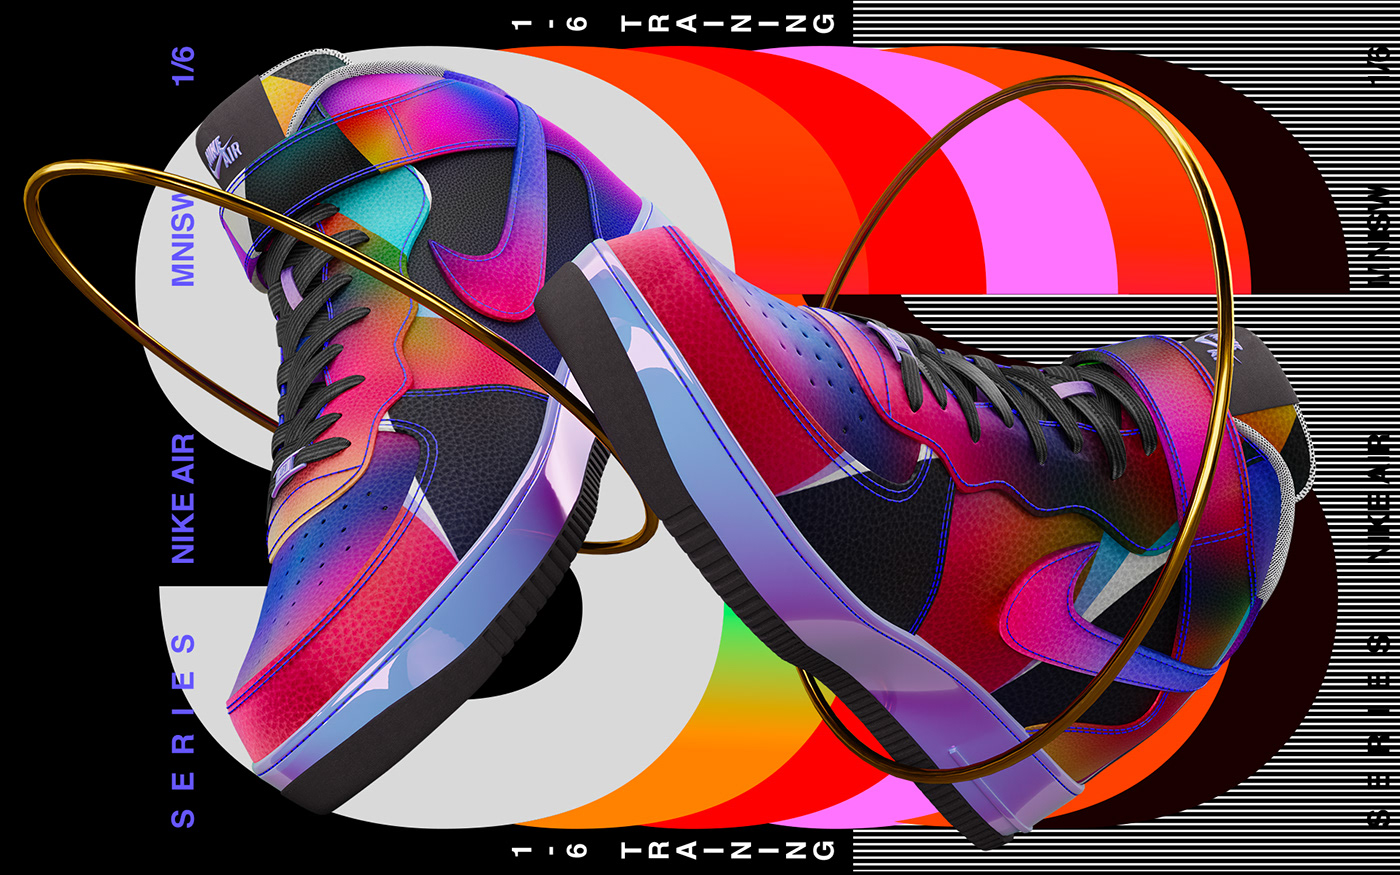 Pattern and graphic design for a Nike Air project